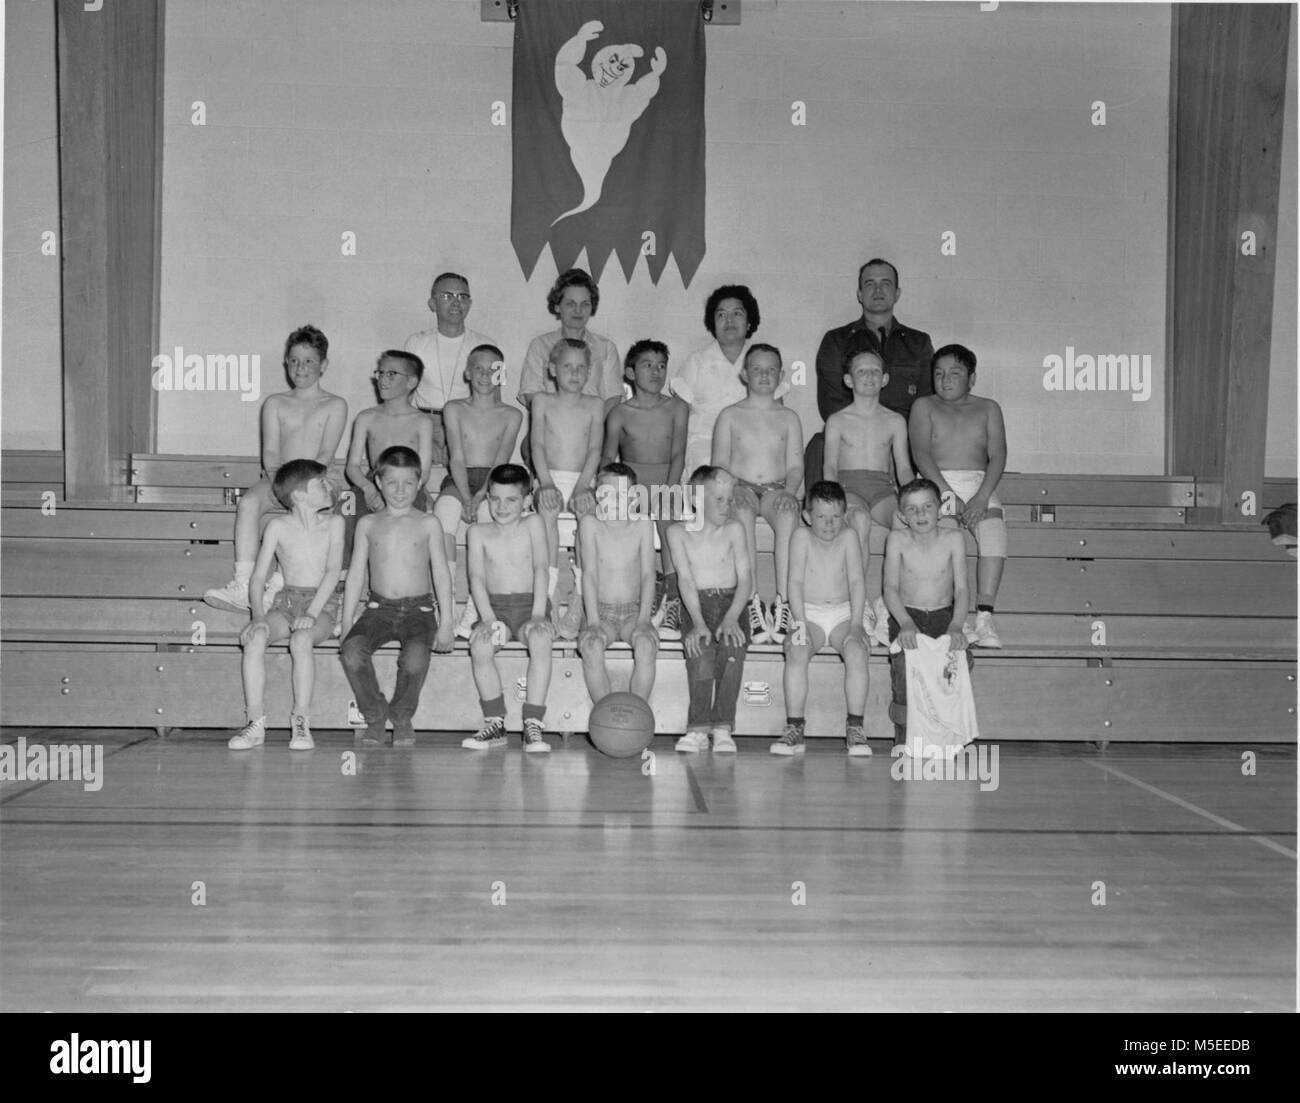 Grand Canyon Historic Cub Scout Basketball Team   CUB SCOUT GROUP BASKETBALL TEAM MARCH 7, 1960.  ROBERT HEYDER, CUB SCOUTMASTER; MRS. JOHN MCLAUGHLIN, DEN MOTHER; MRS. ELIZABETH ARKIE, AND MR. JACK SETTLES, COUSELLORS. Stock Photo